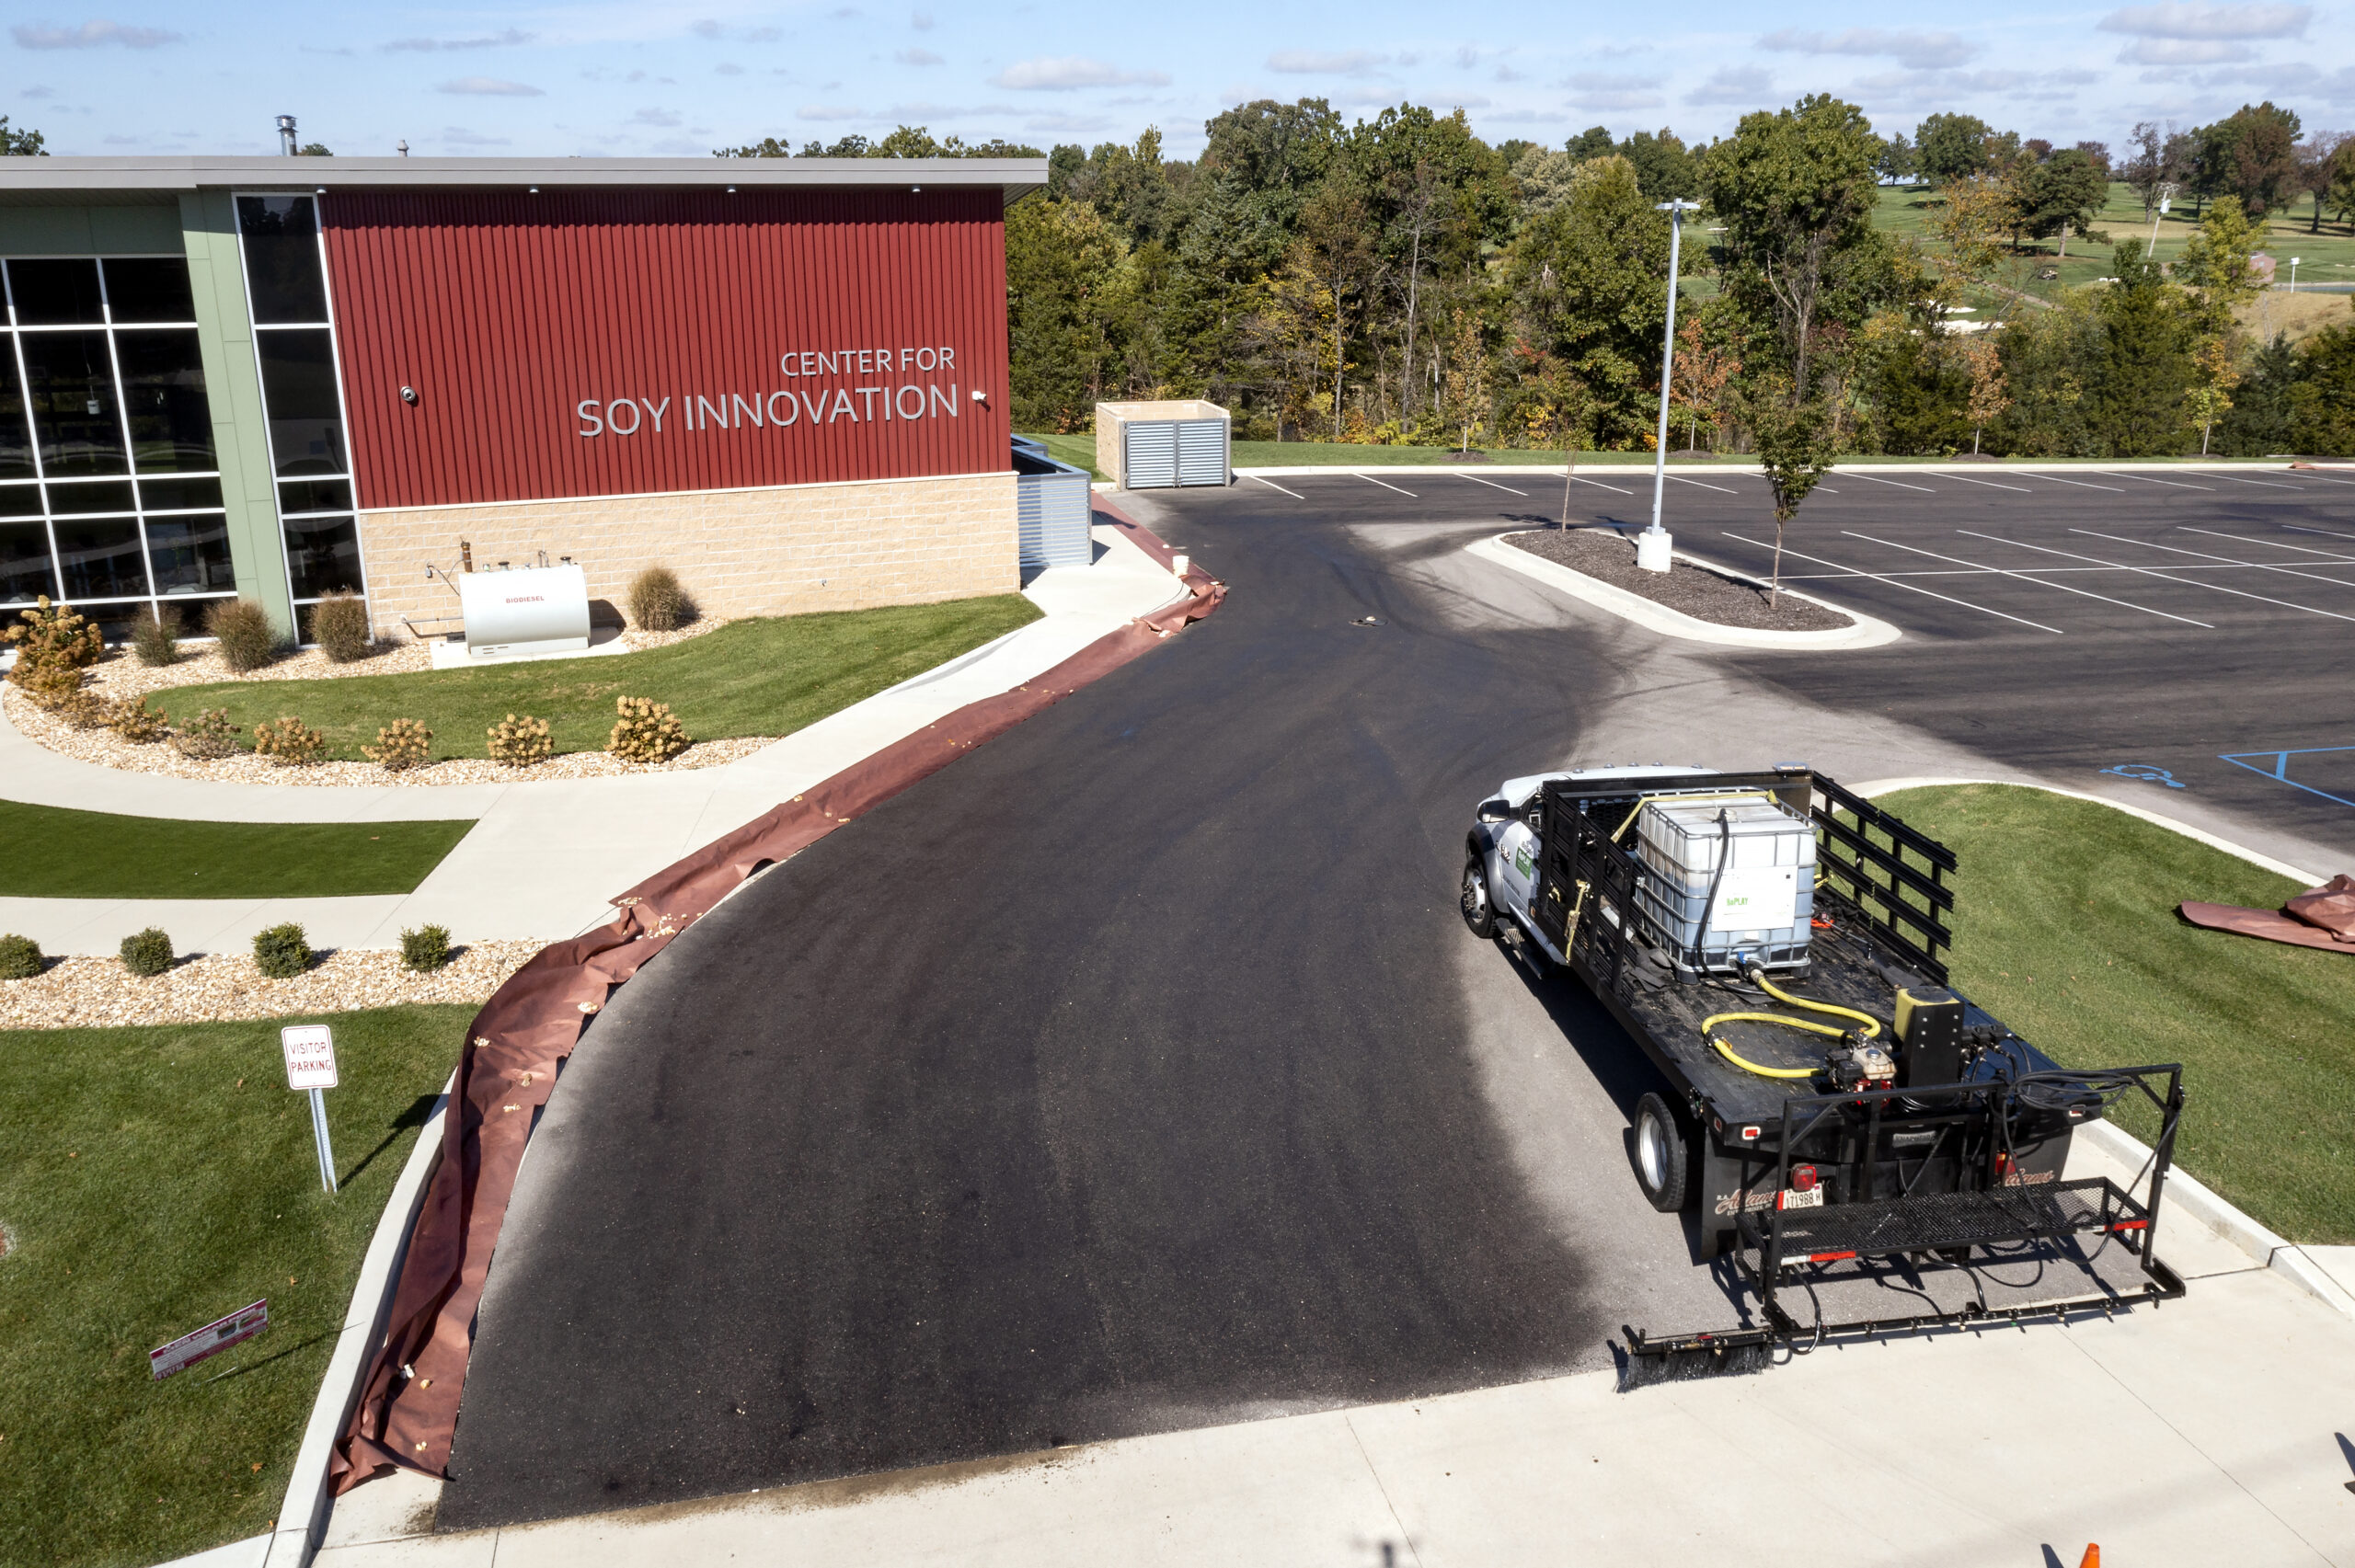 A truck applying RePlay is an agricultural oil seal and preservation agent to the asphalt in front of the Center for Soy Innovation Building